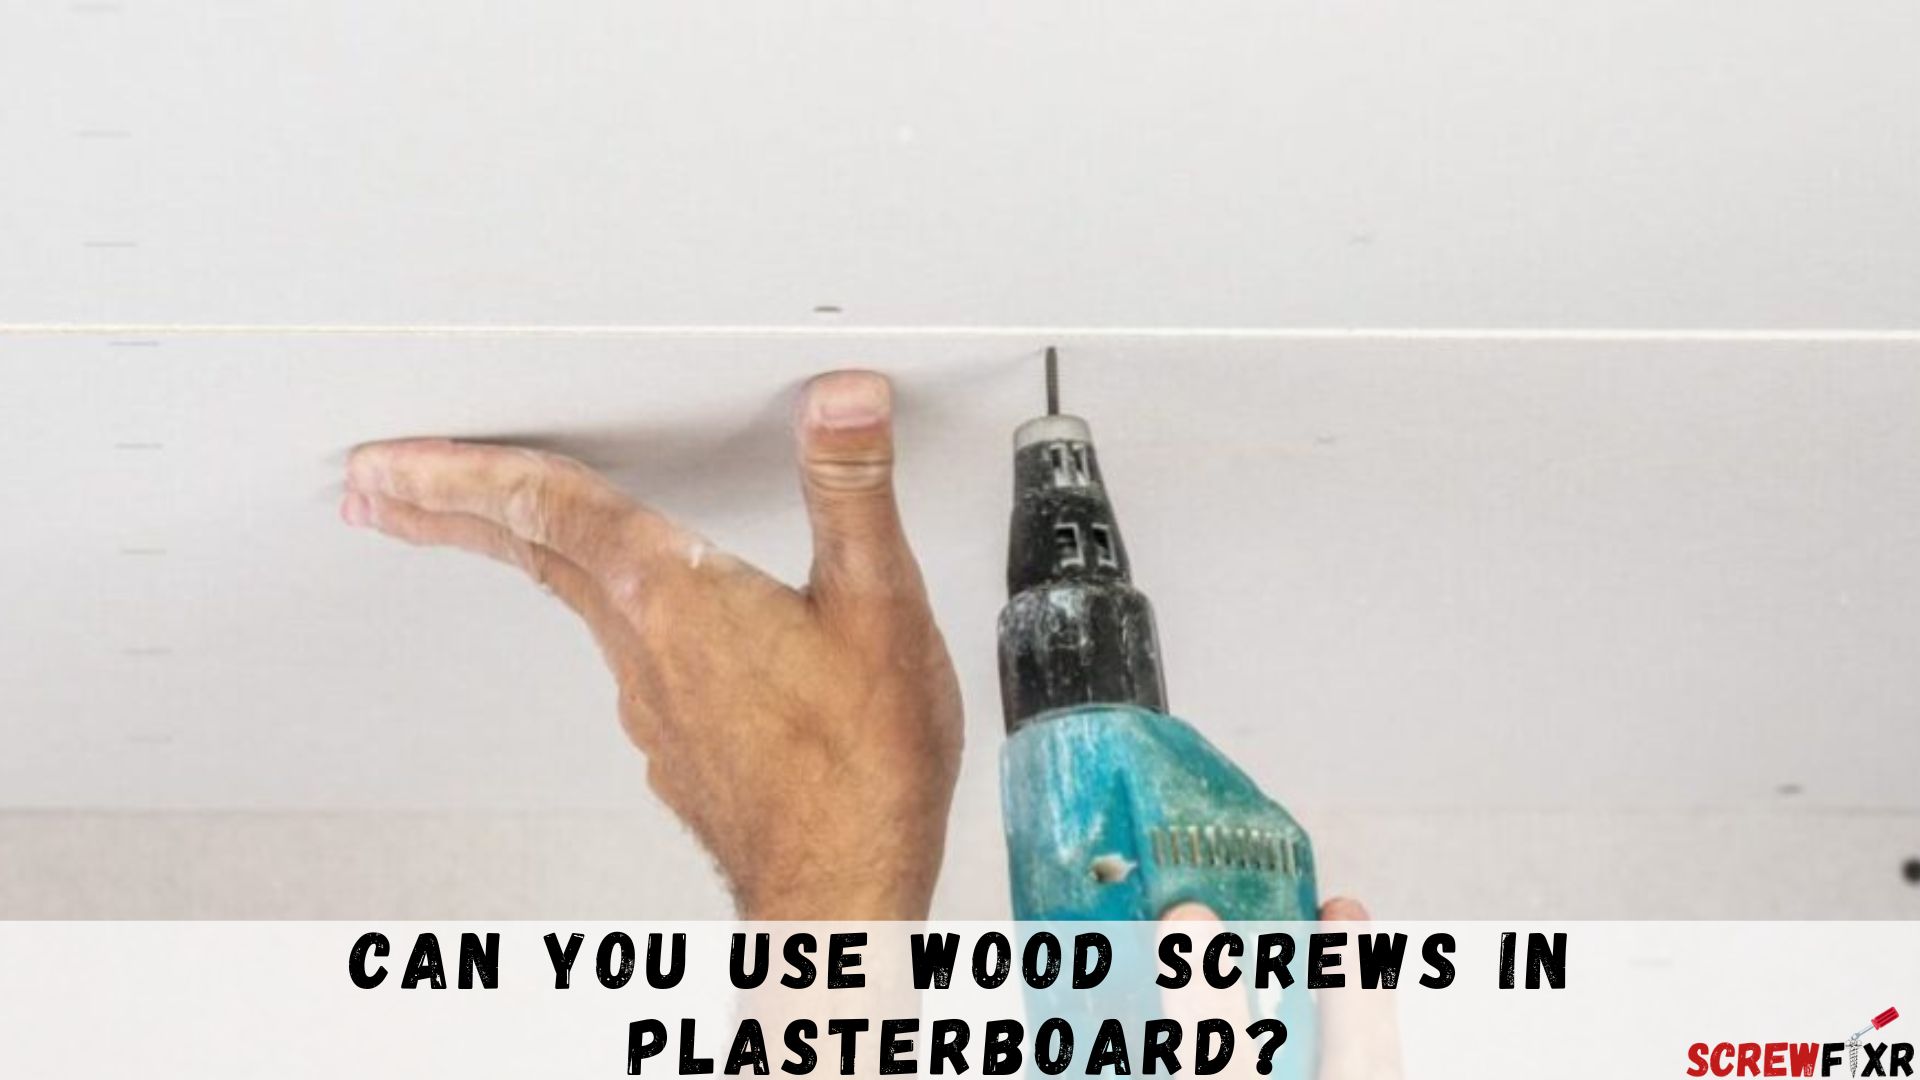 Can You Use Wood Screws In Plasterboard?